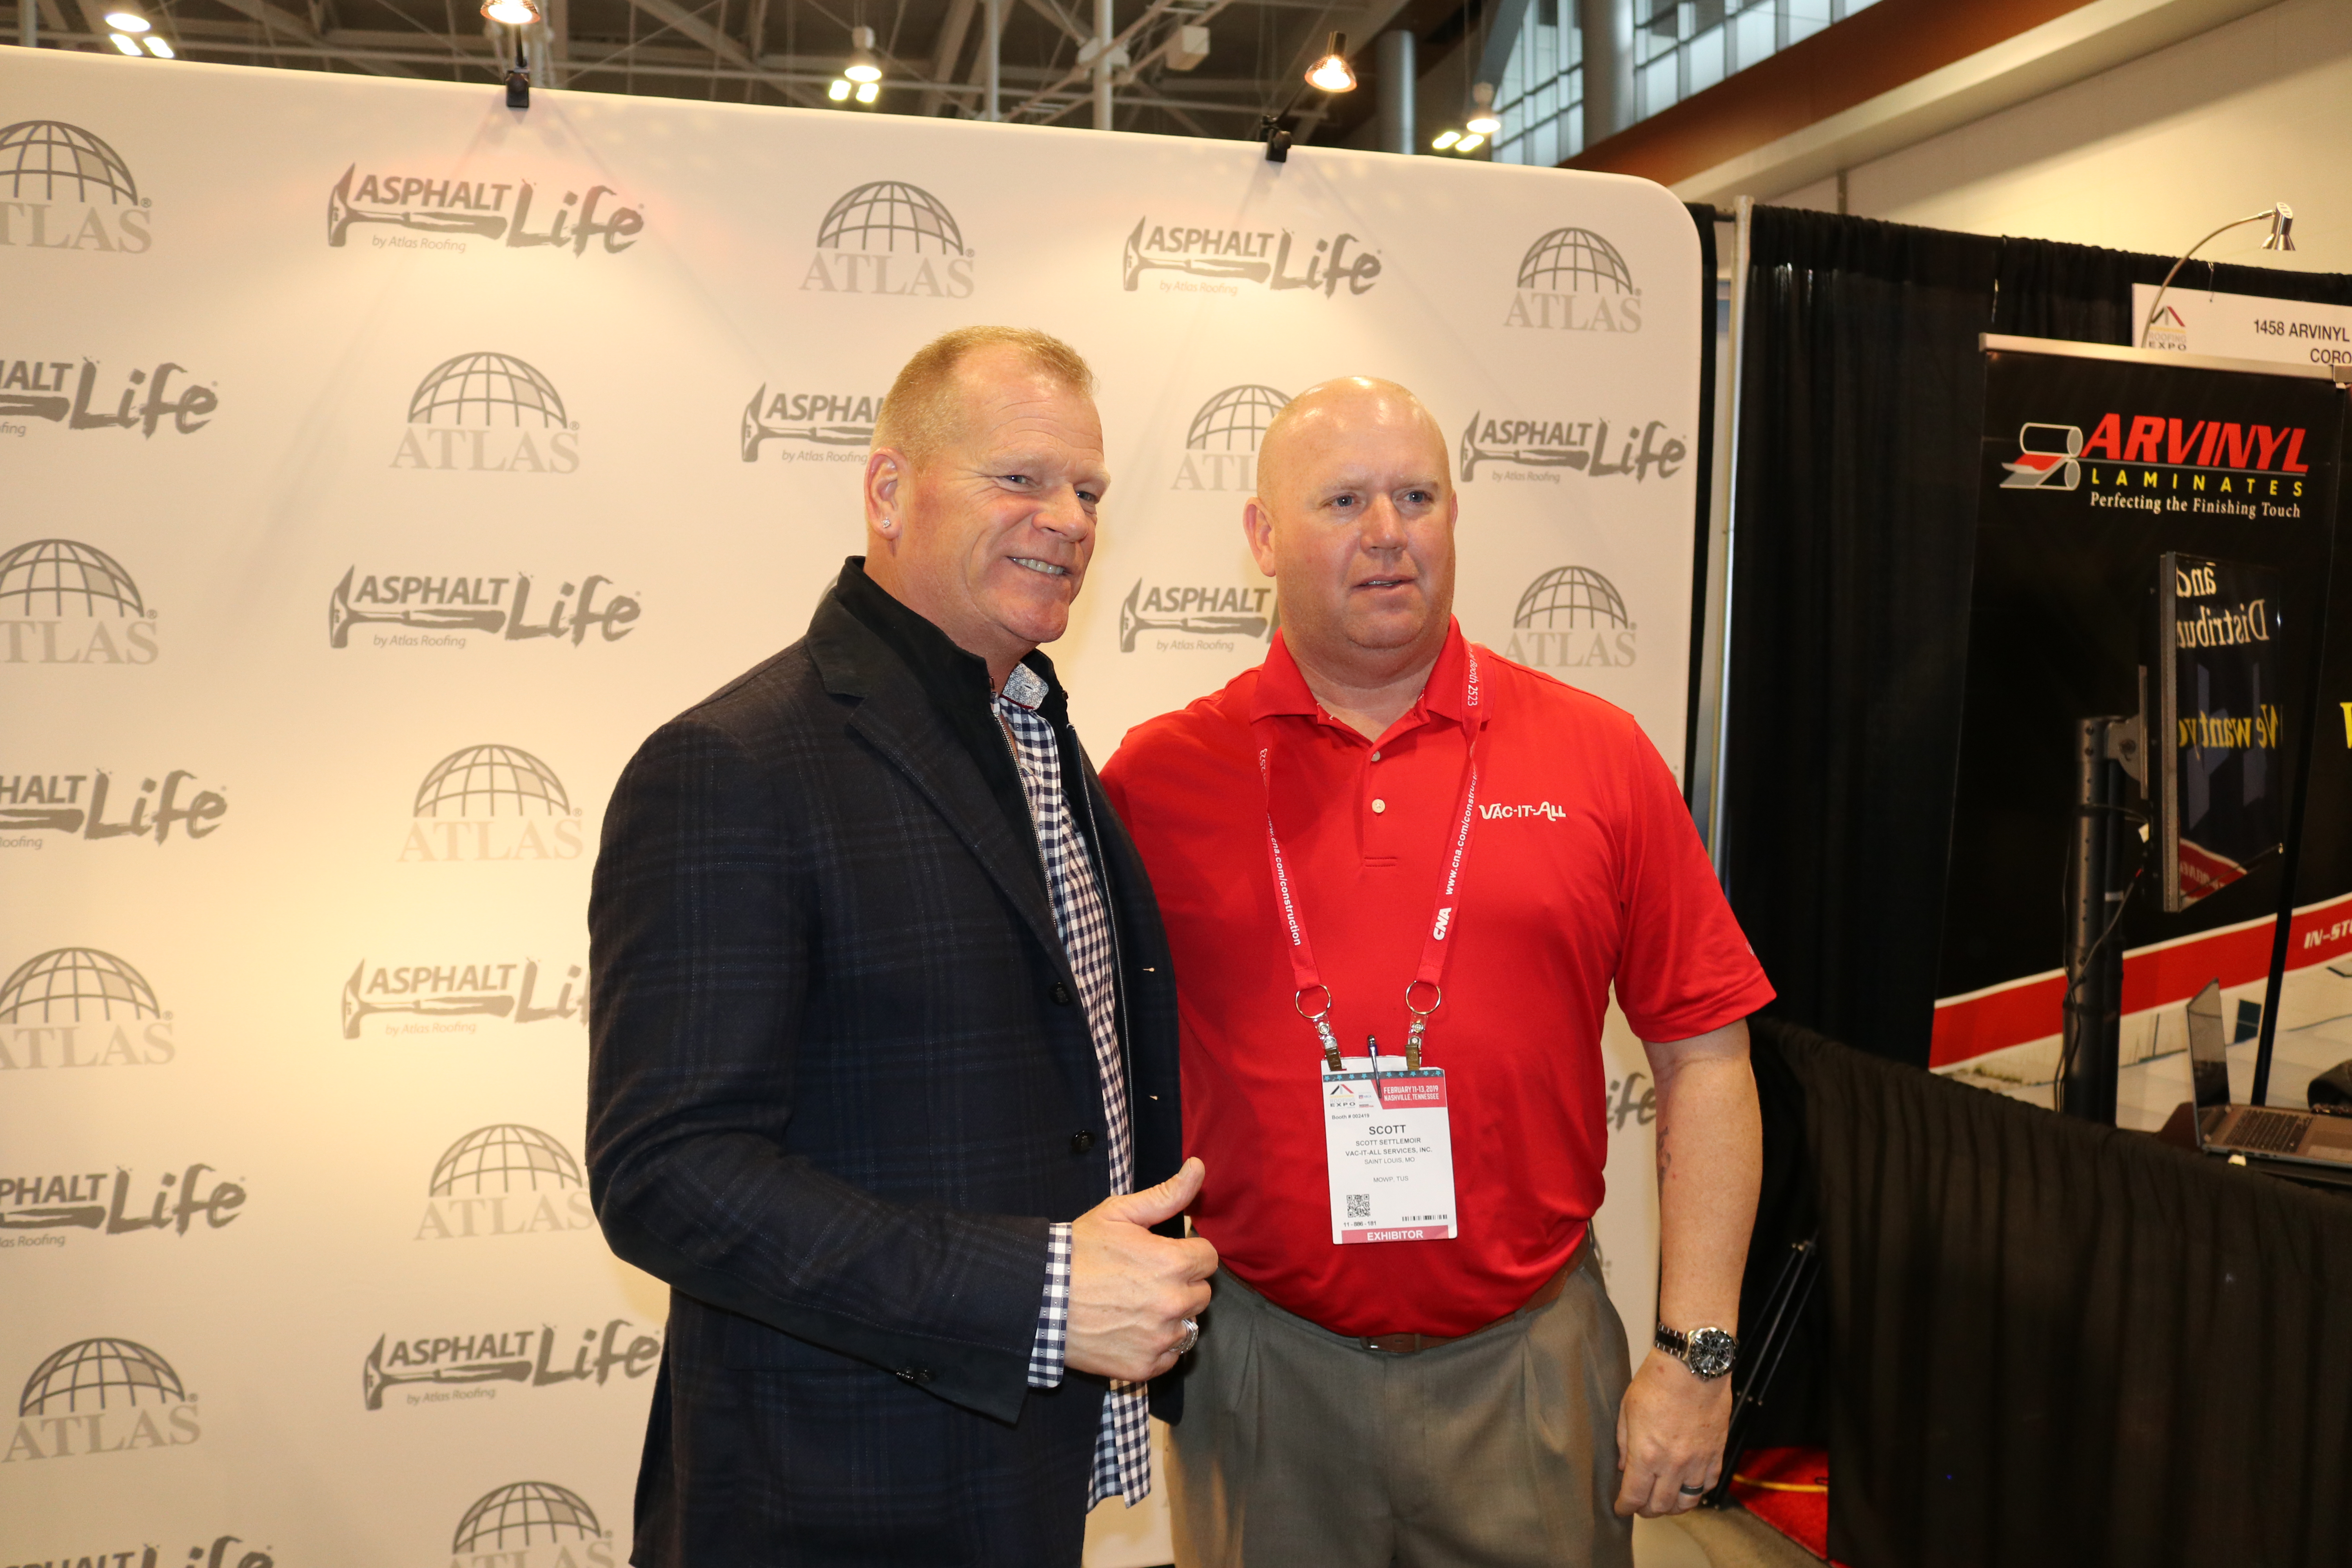 Mike Holmes photo op with IRE attendees